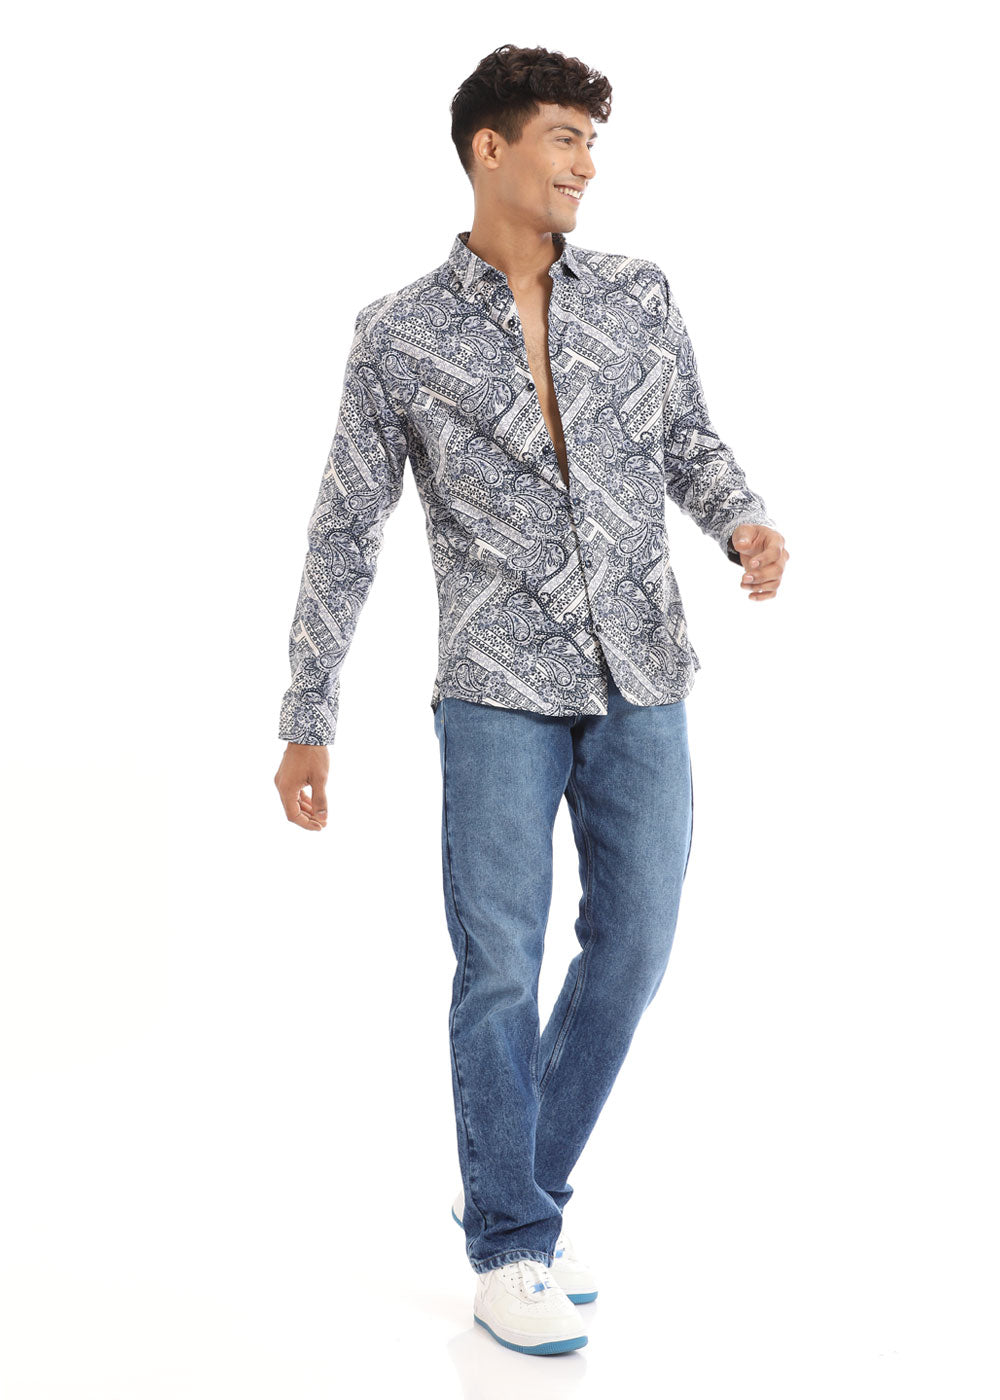 Get Now Floral Paisley Printed Shirt